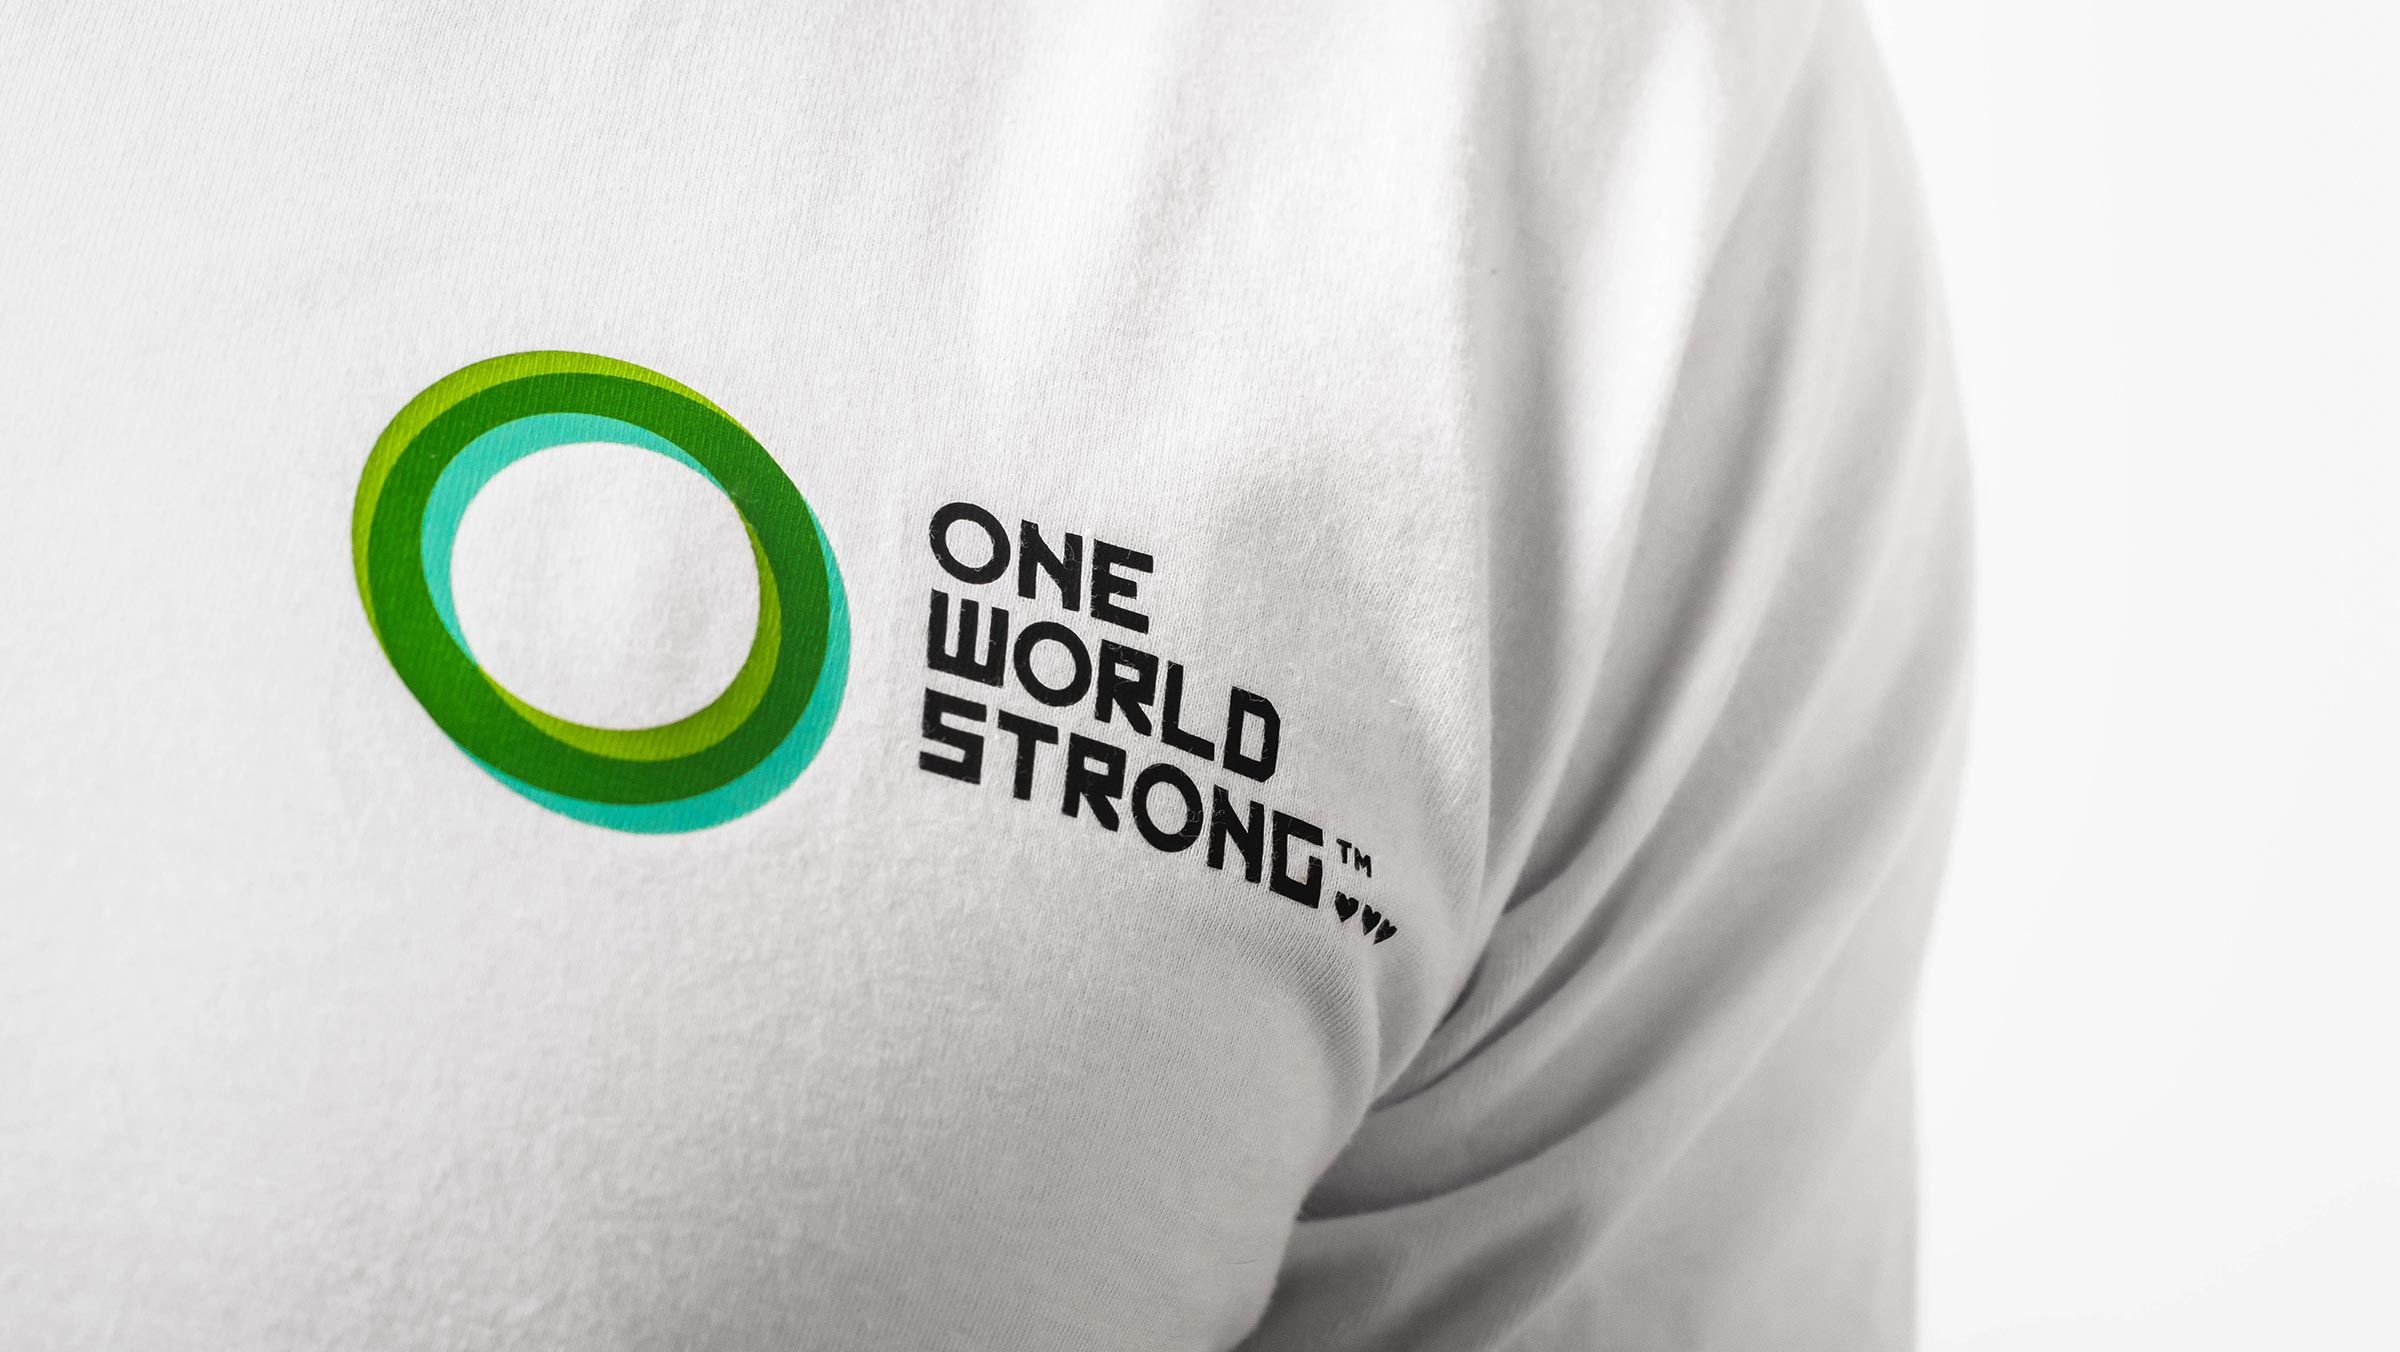 One World Strong